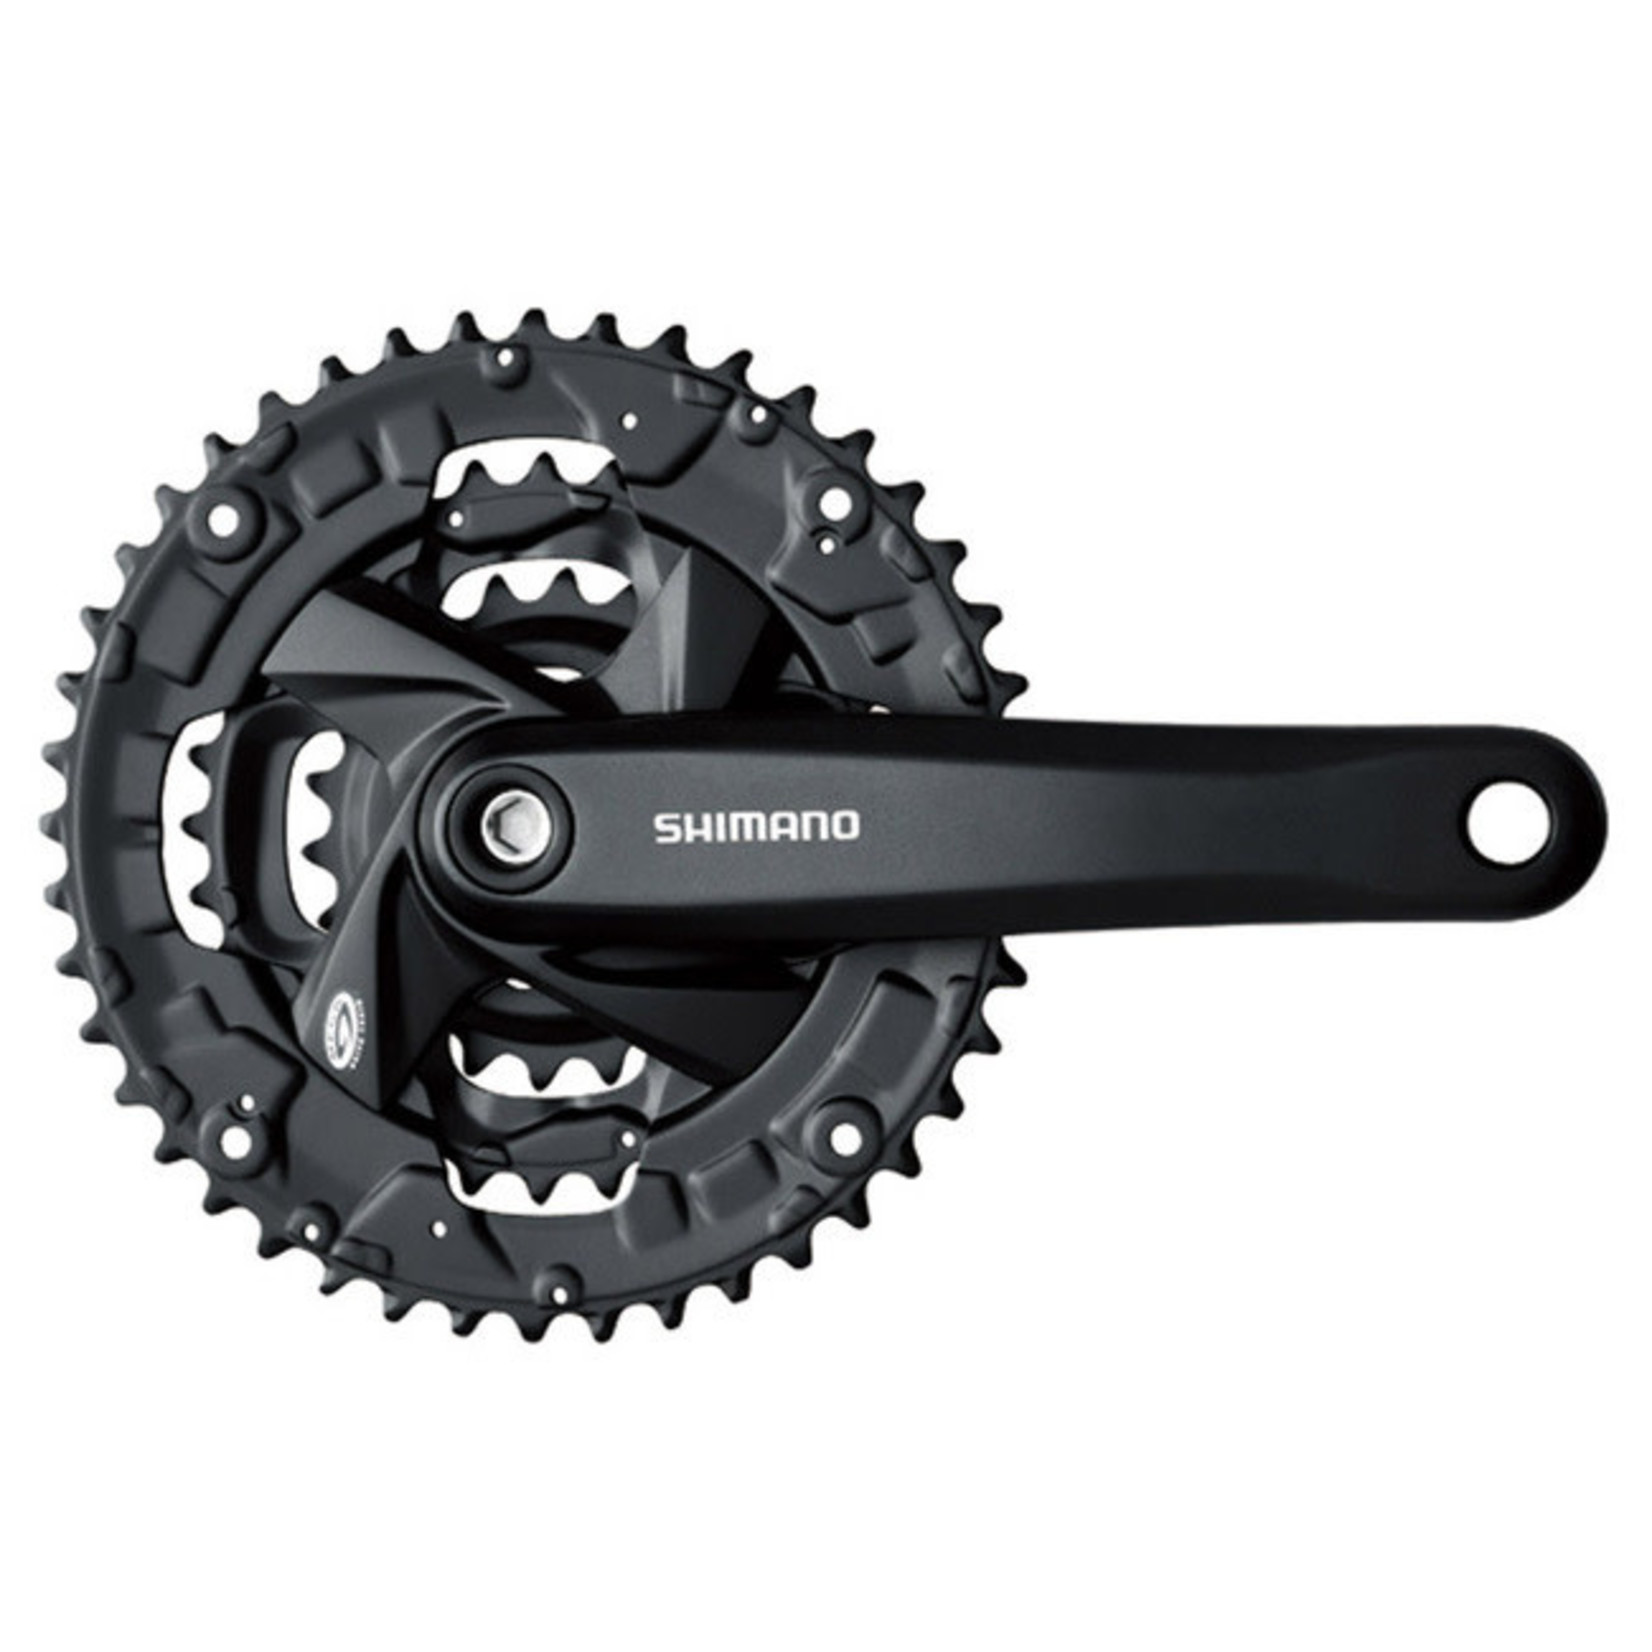 Shimano FRONT CHAINWHEEL, FC-M371-L, FOR REAR 9-SPEED, 175MM, 48X36X26T W/CHAIN GUARD(INTEGRATED TYPE), CHAIN CASE COMPATIBLE, BLACK W/FIXING BOLT, SHIMANO LOGO